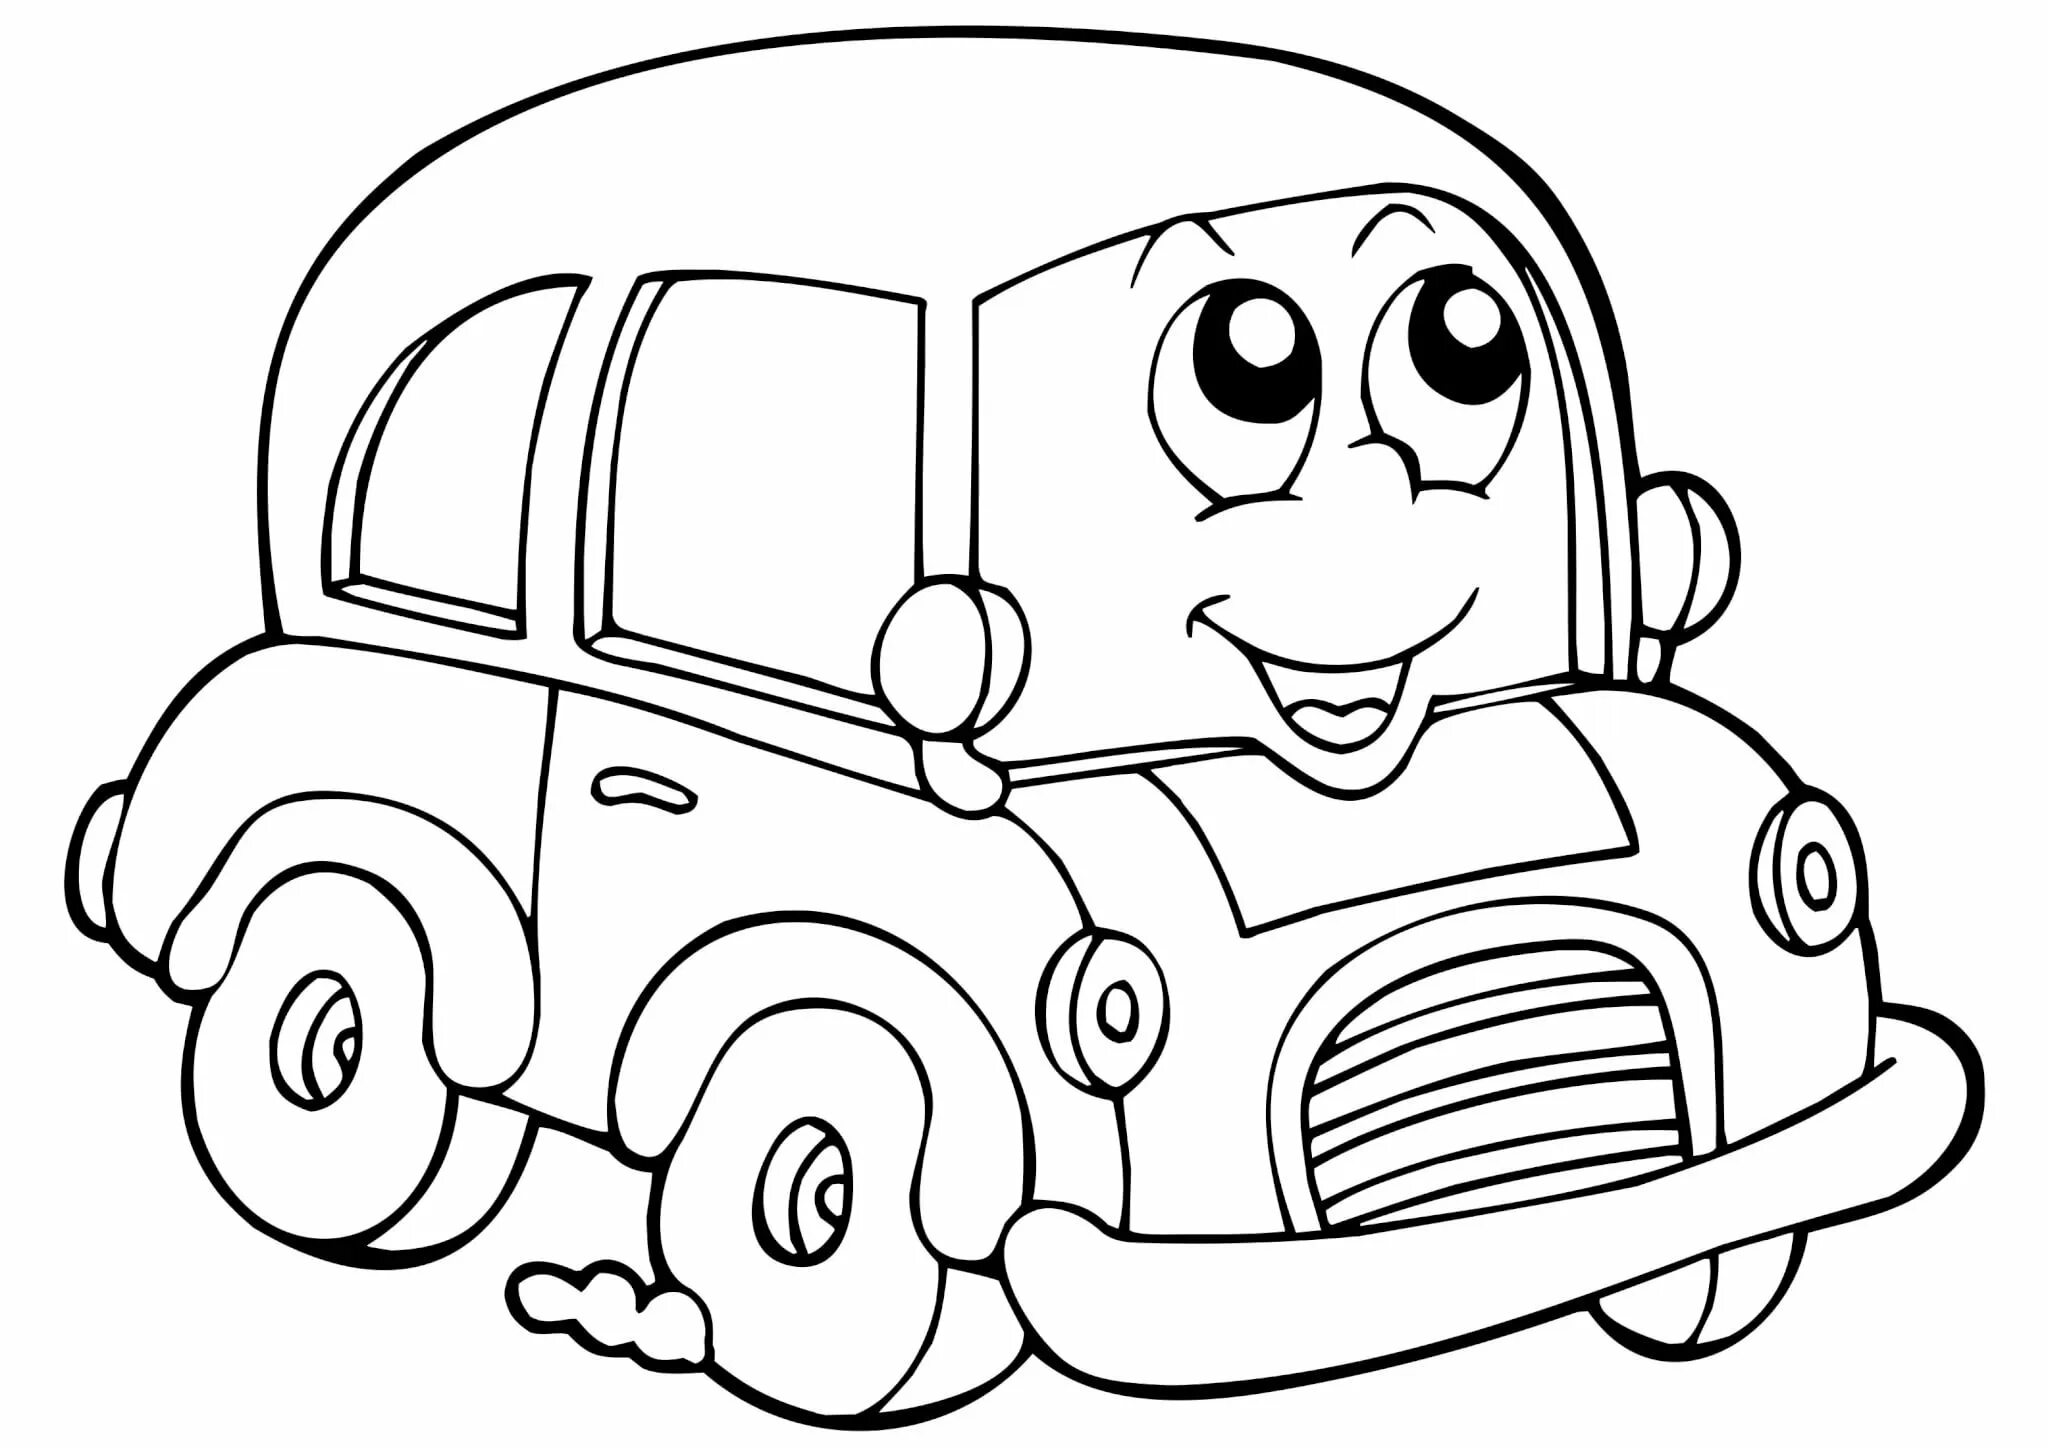 Coloring page majestic little car